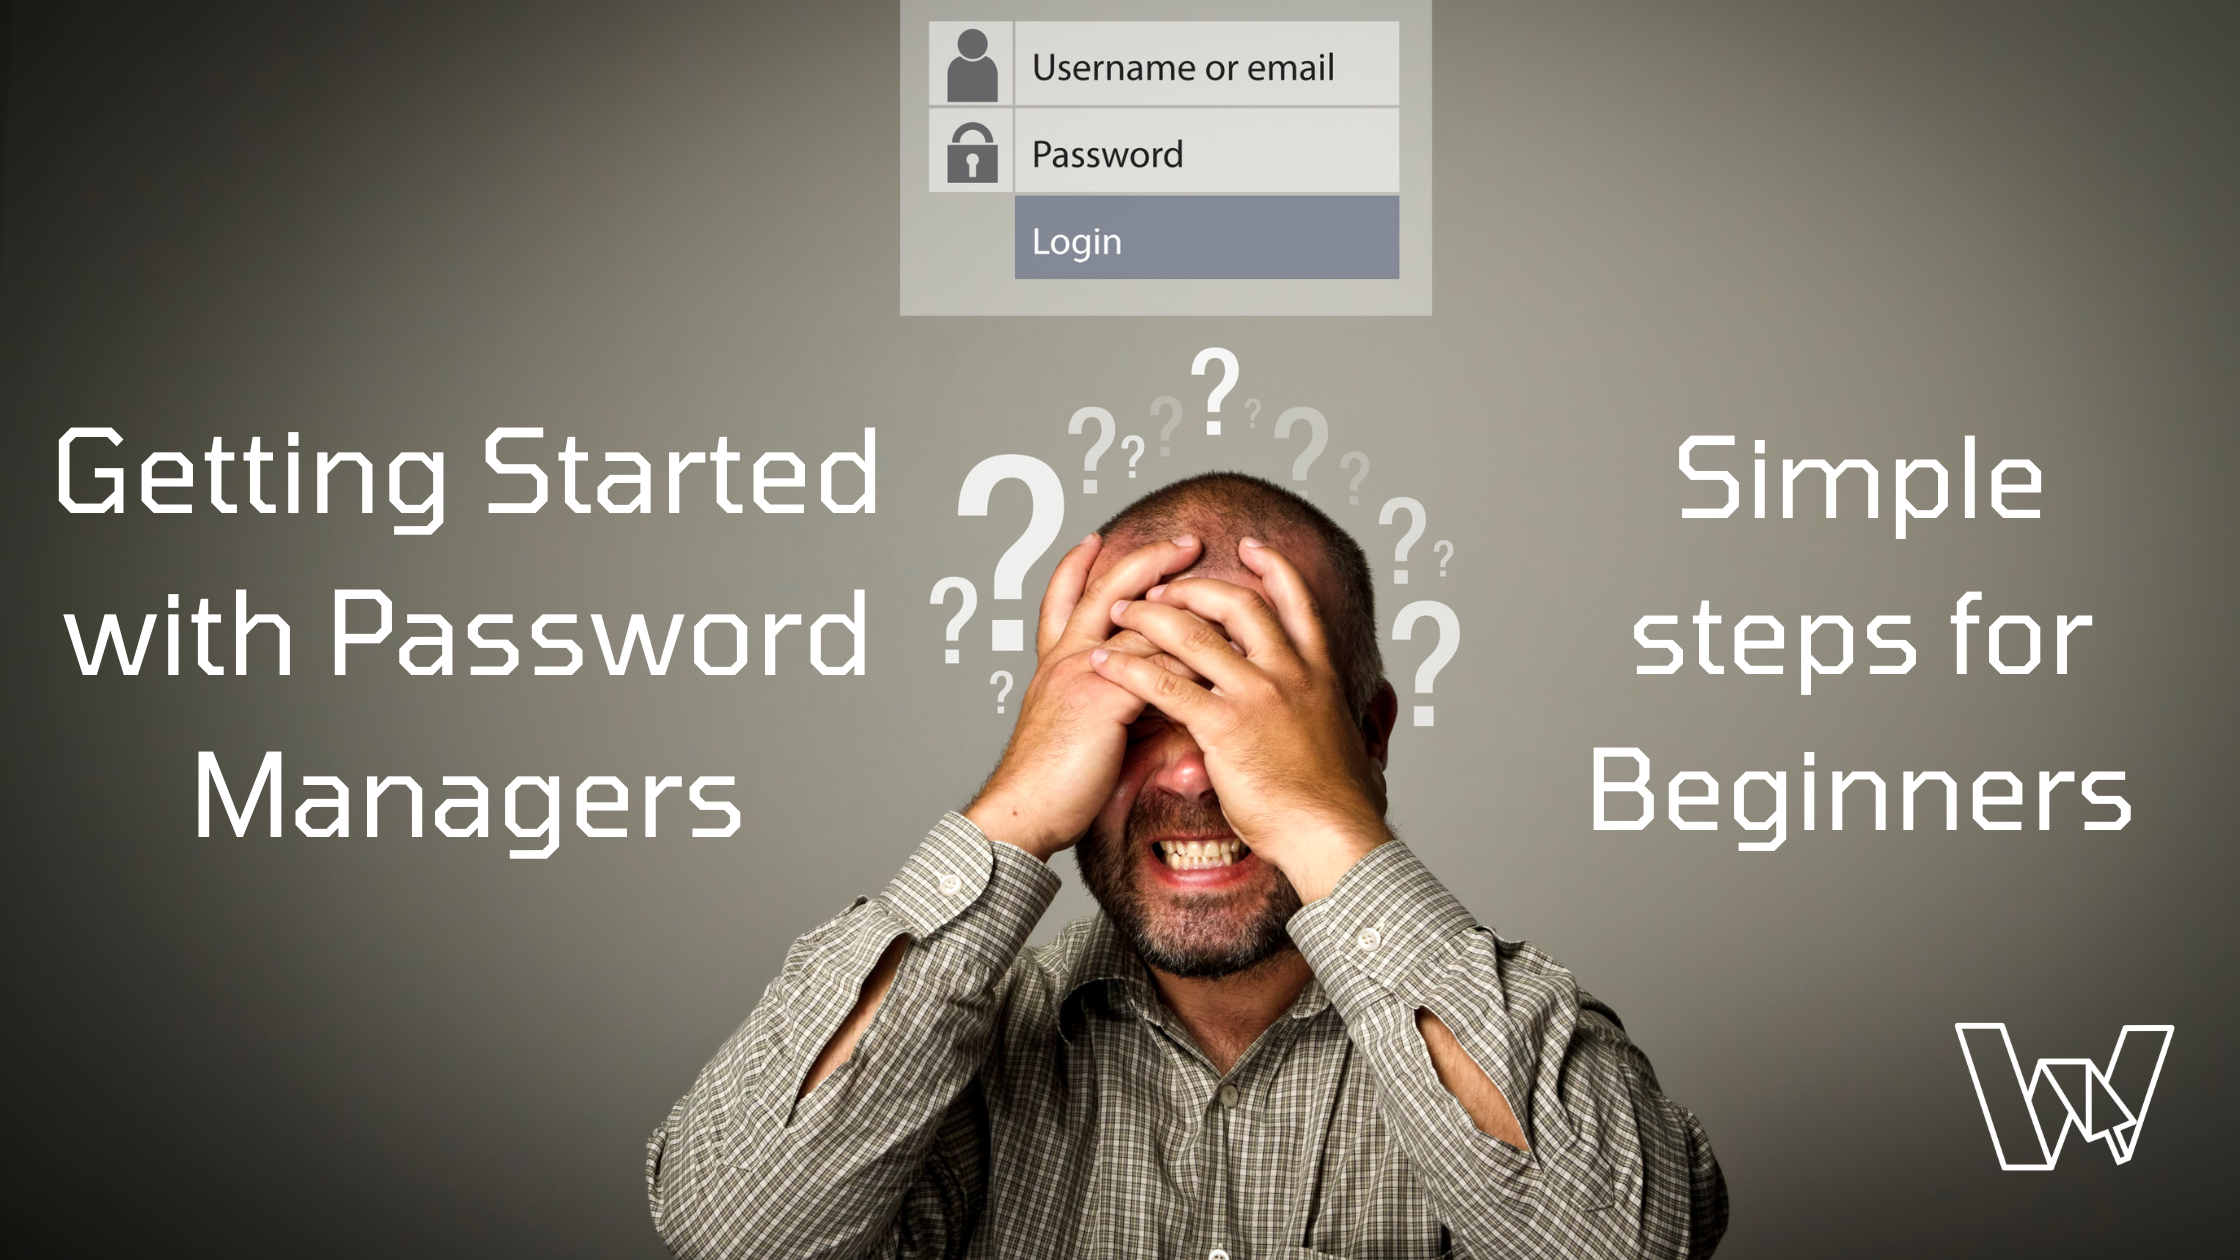 Getting Started with Password Managers